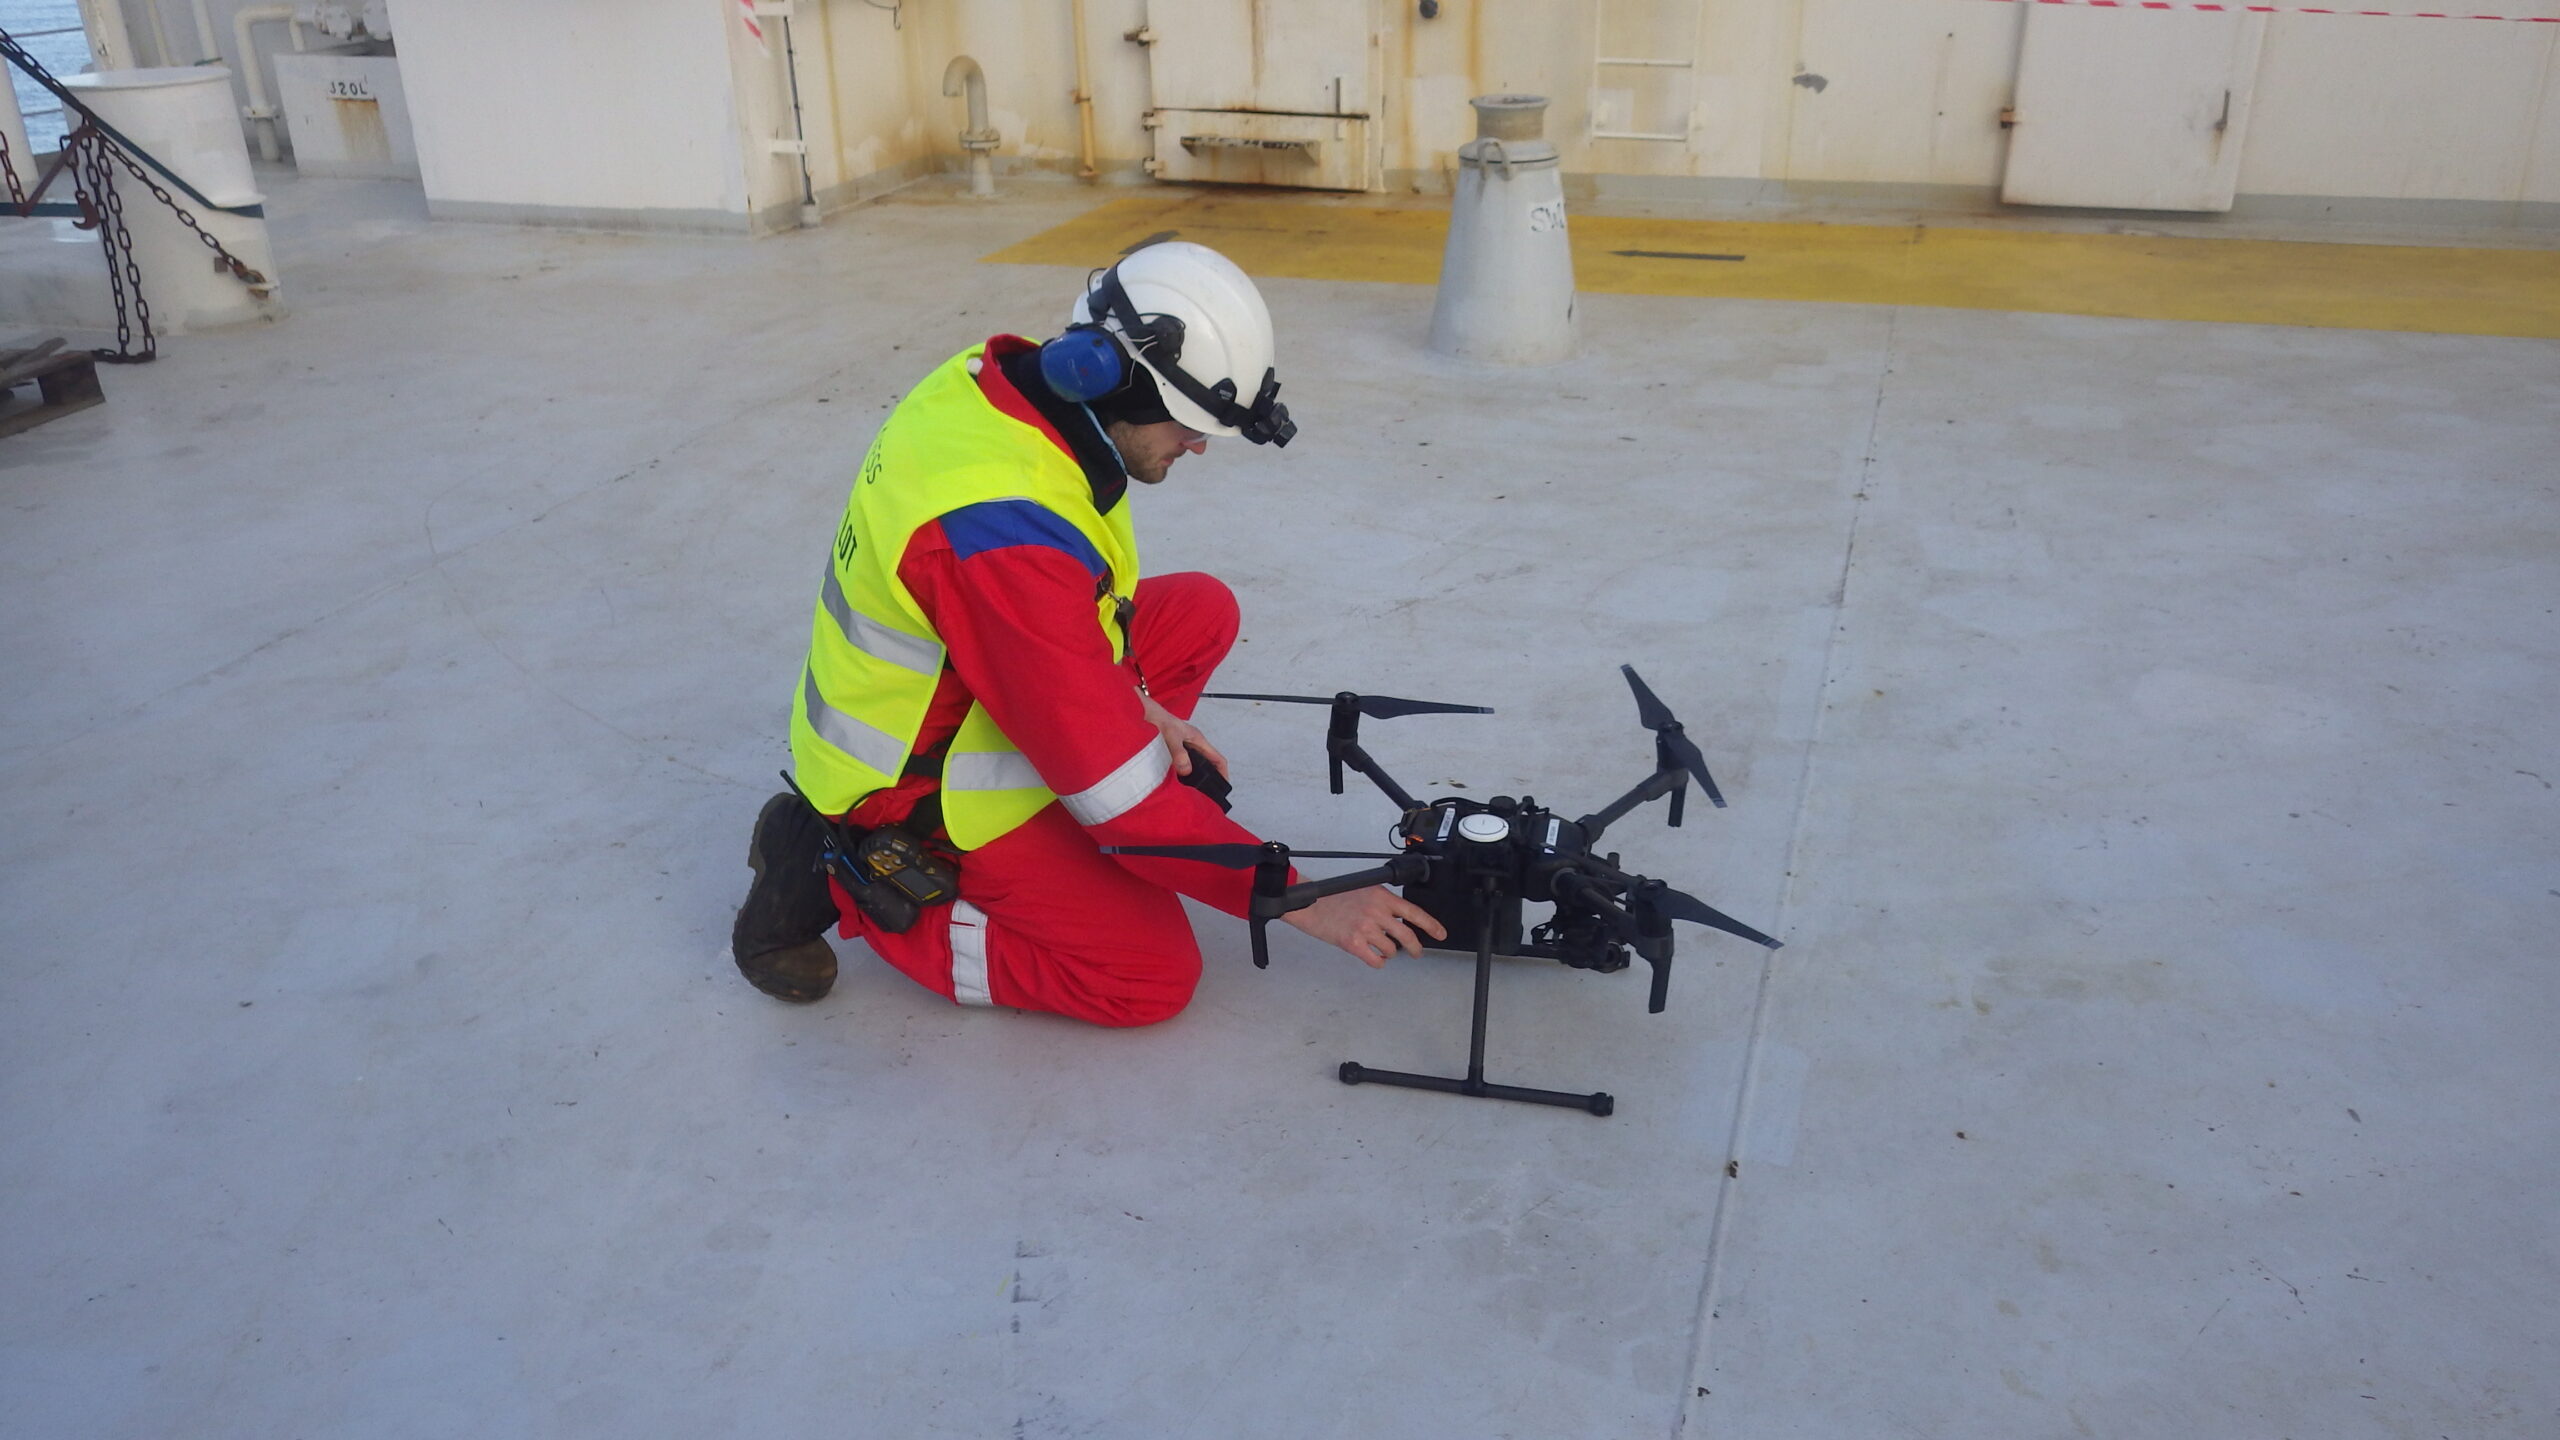 Axess’ engineer with the drone